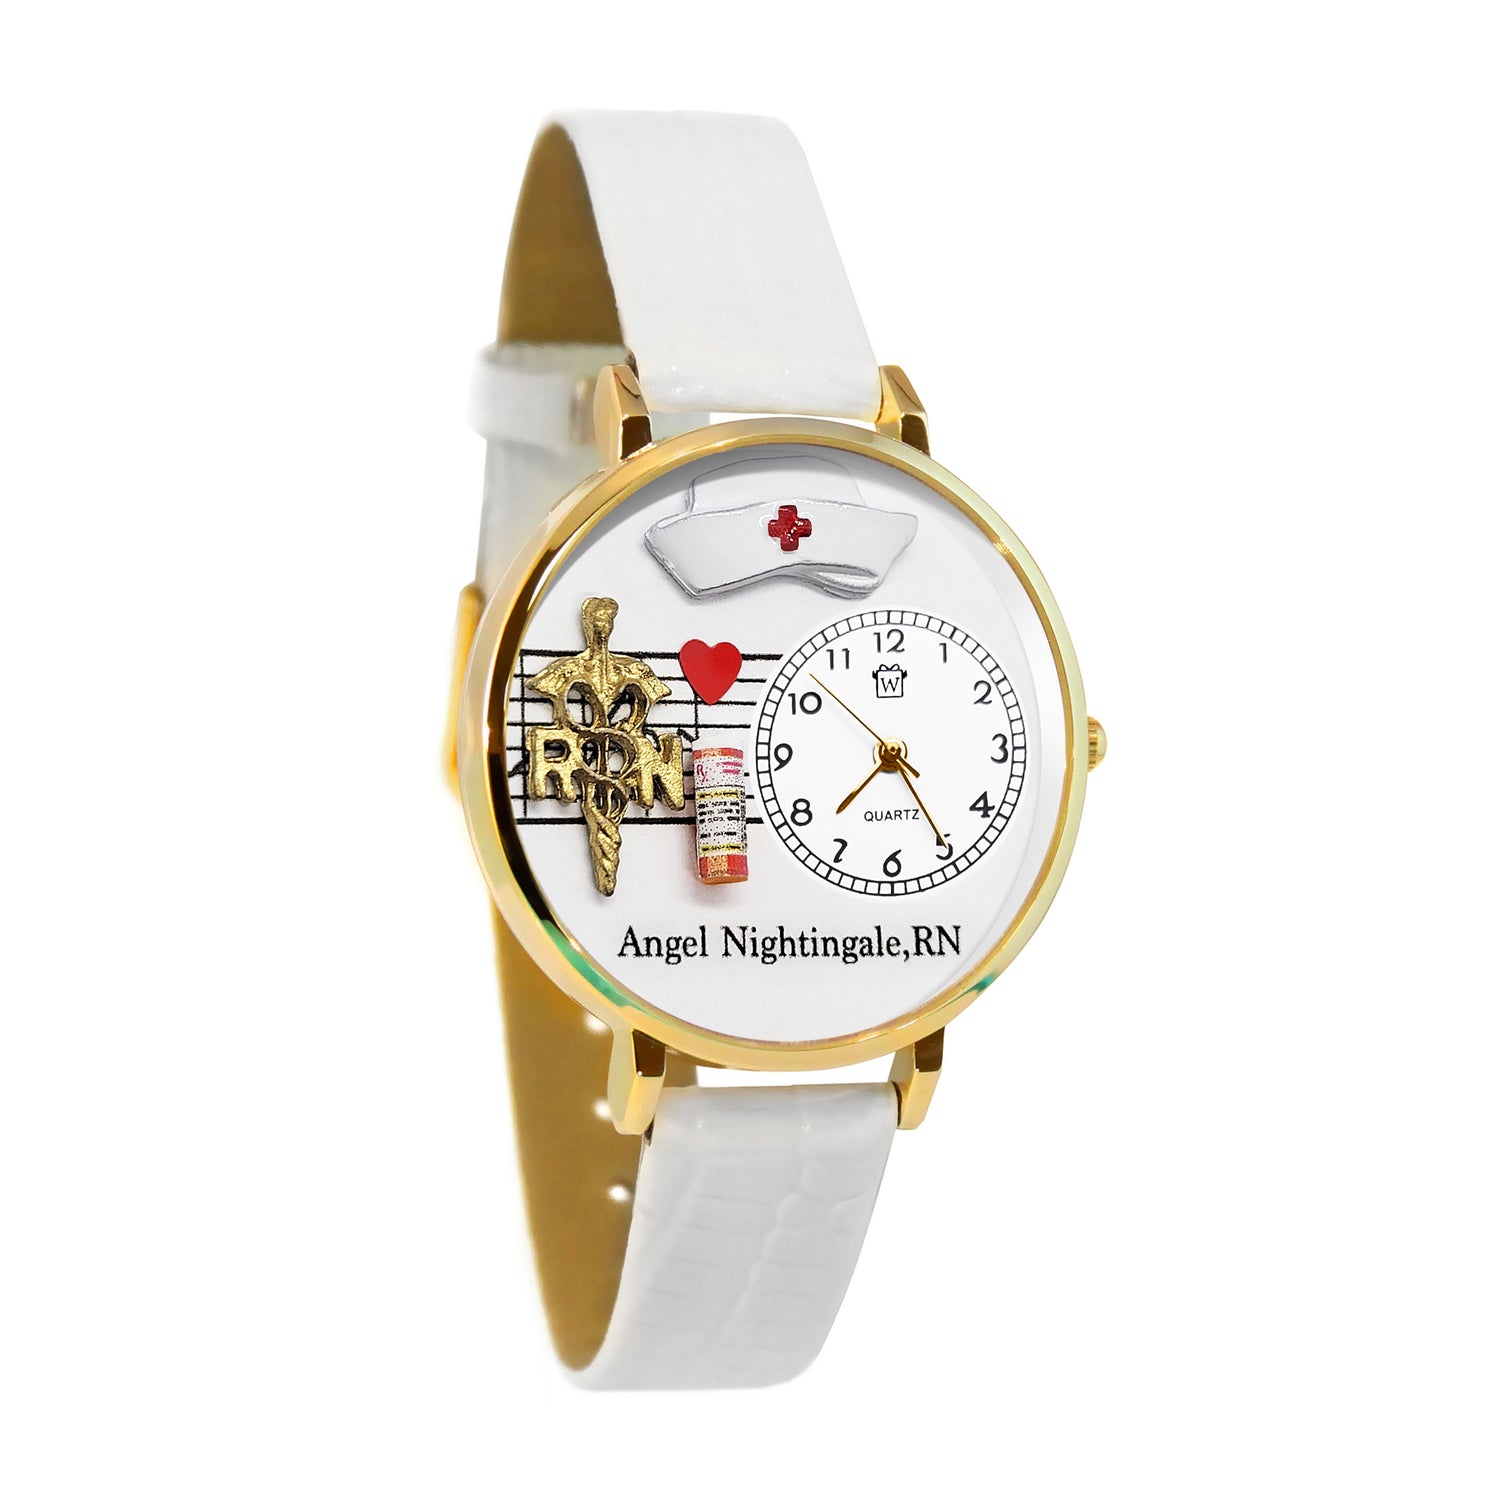 Whimsical Gifts | Personalized Nurse RN 3D Watch Large Style | Handmade in USA | Professions Themed | Nurse | Novelty Unique Fun Miniatures Gift | Gold Finish White Leather Watch Band